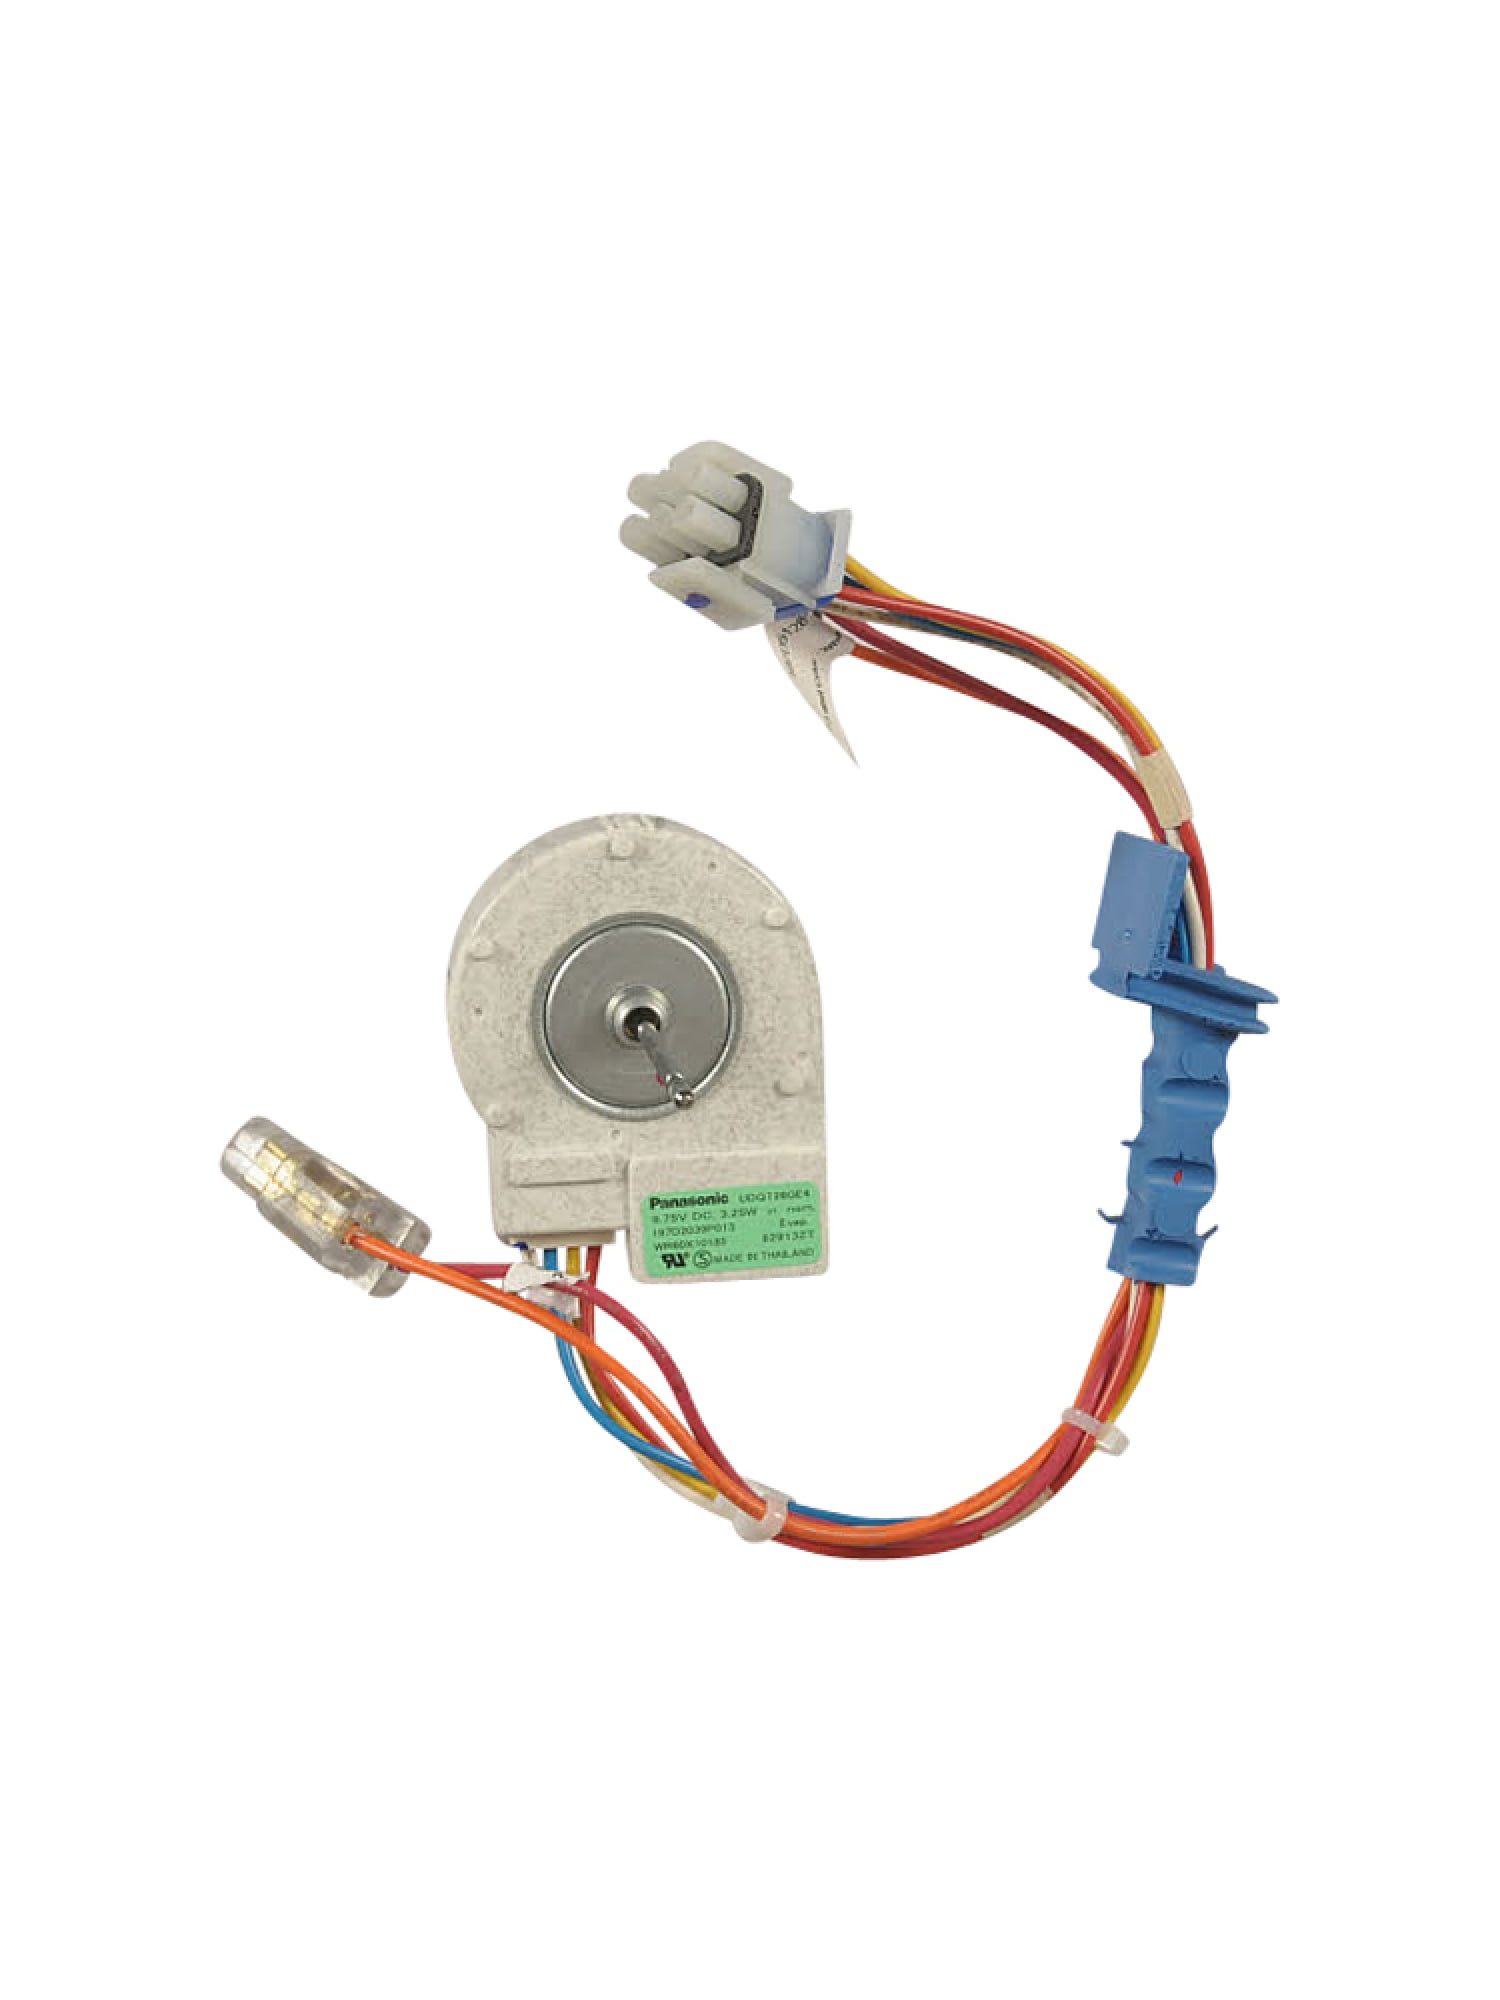 WR09X10133 GE Refrigerator Temperature Control Thermostat Ap3995996 Ps1483253 for sale online 